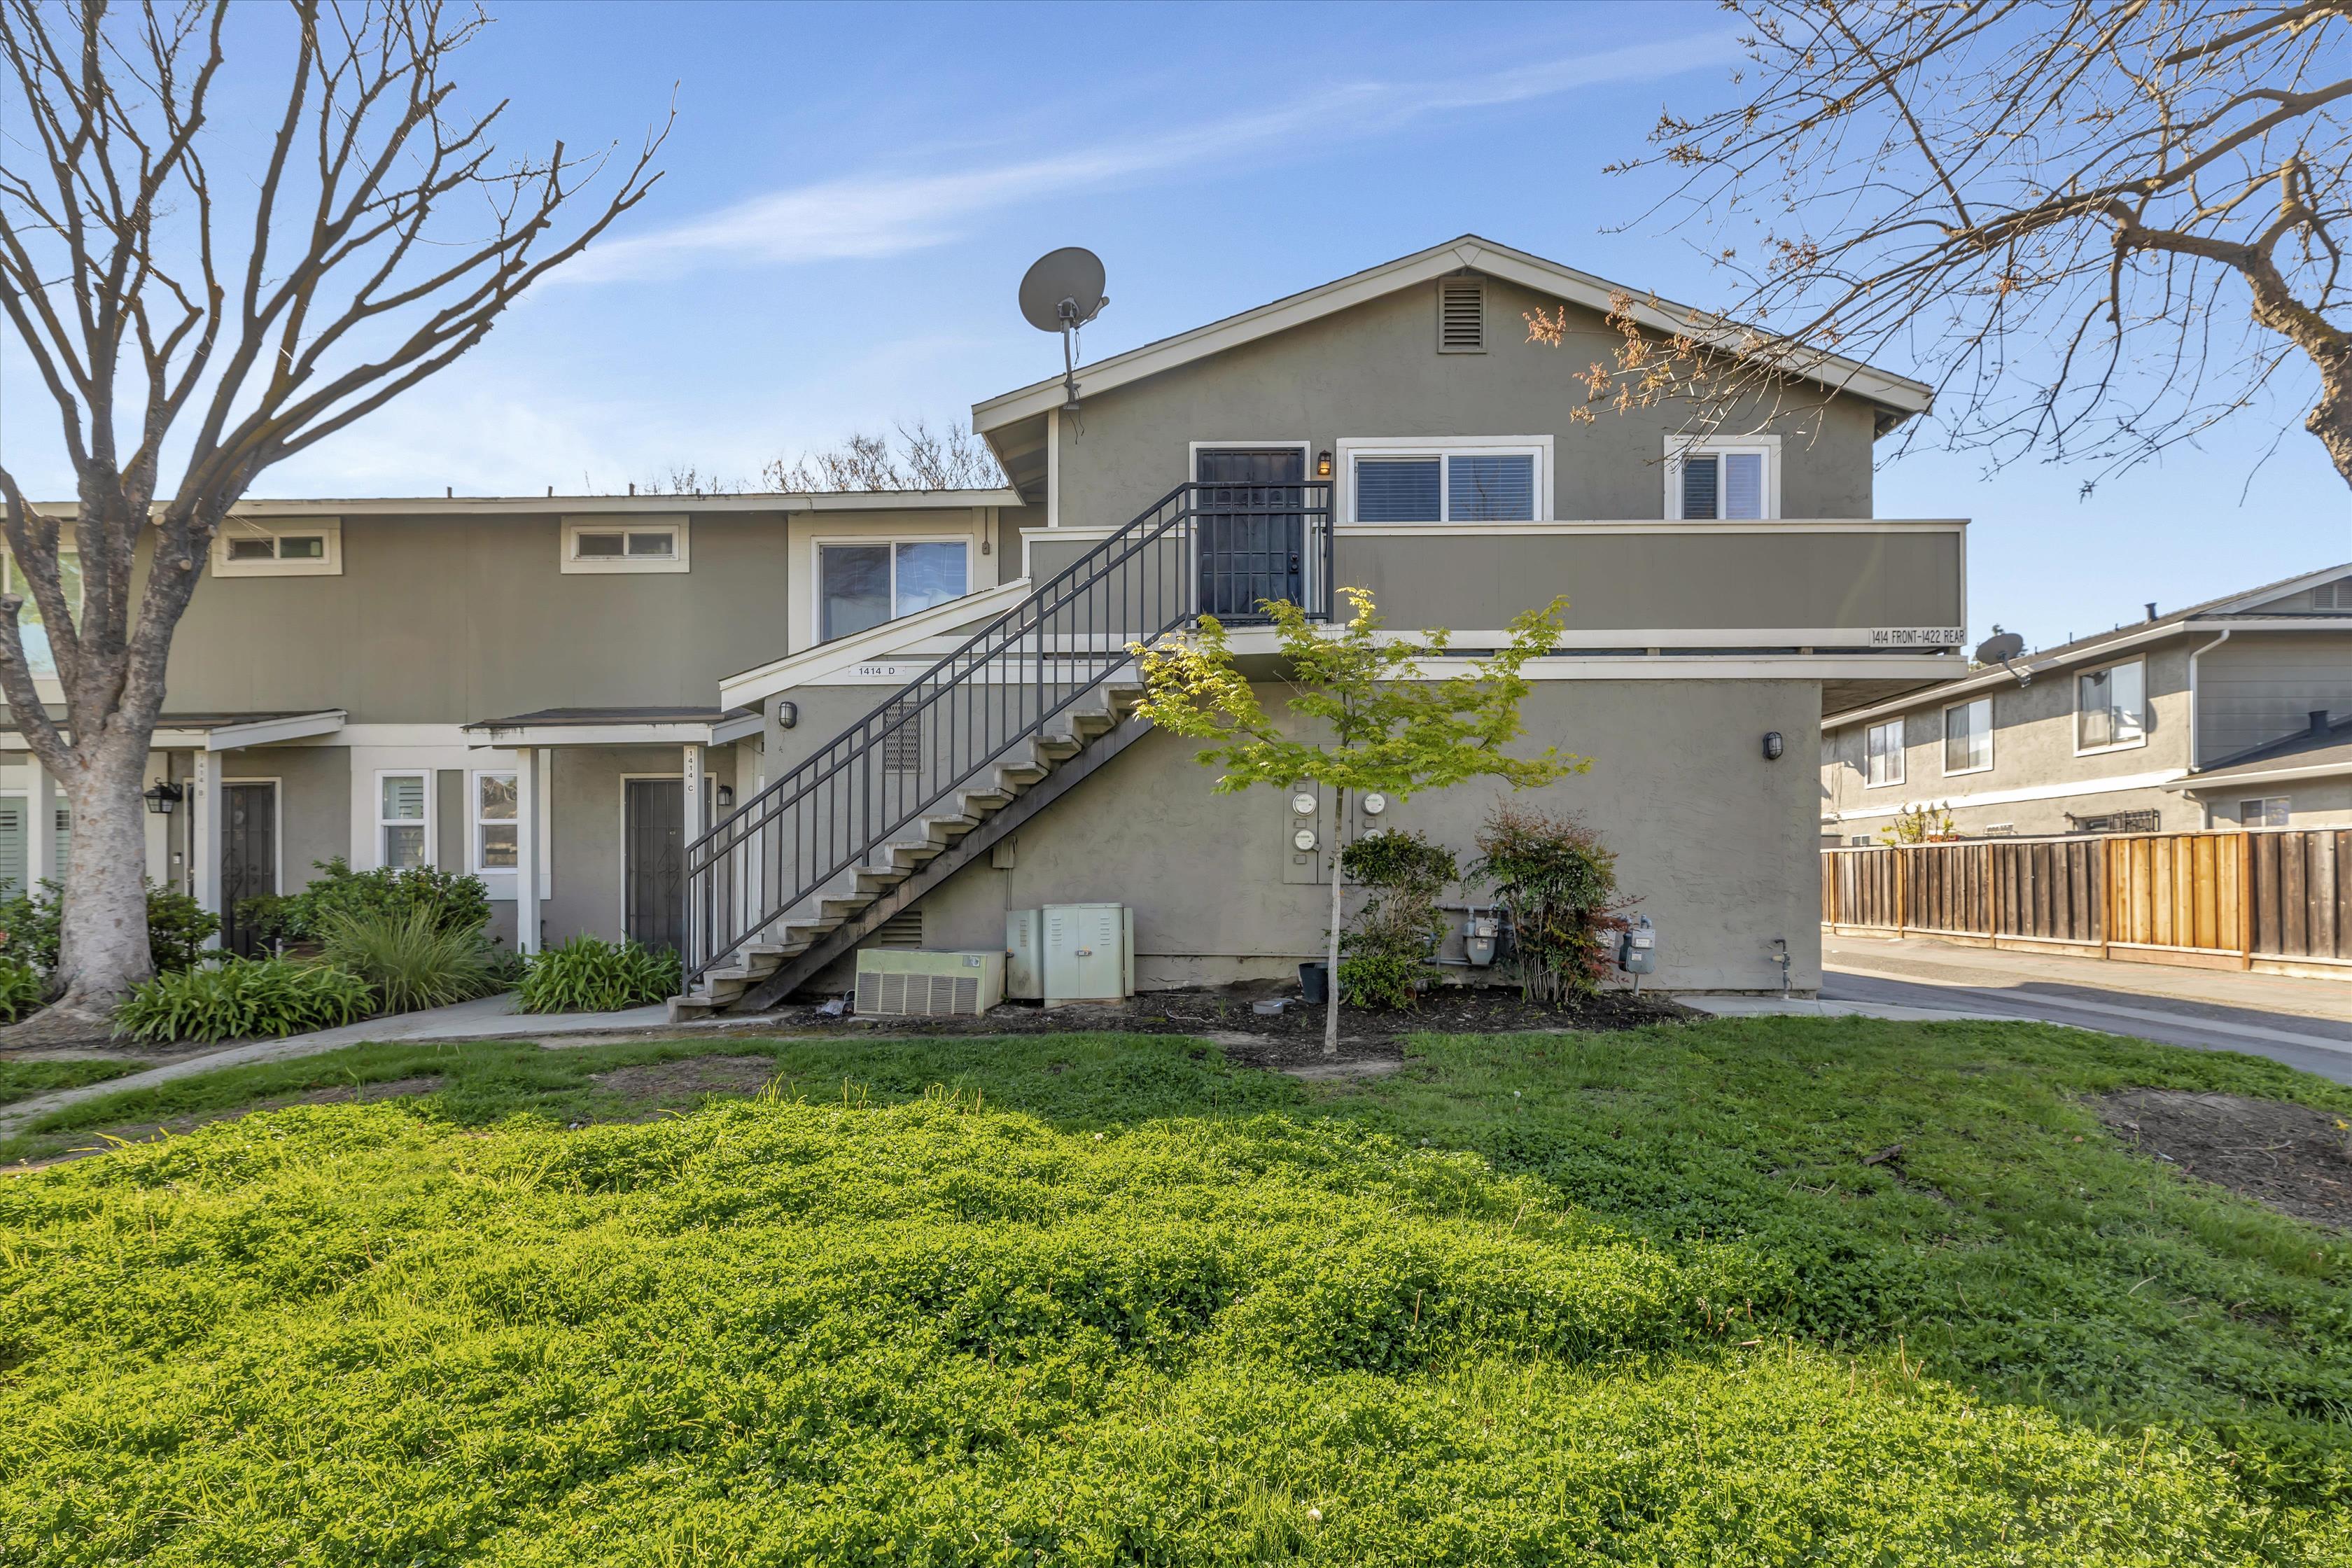 Beautiful Canoas East, San Jose, CA house showcasing the best property management services